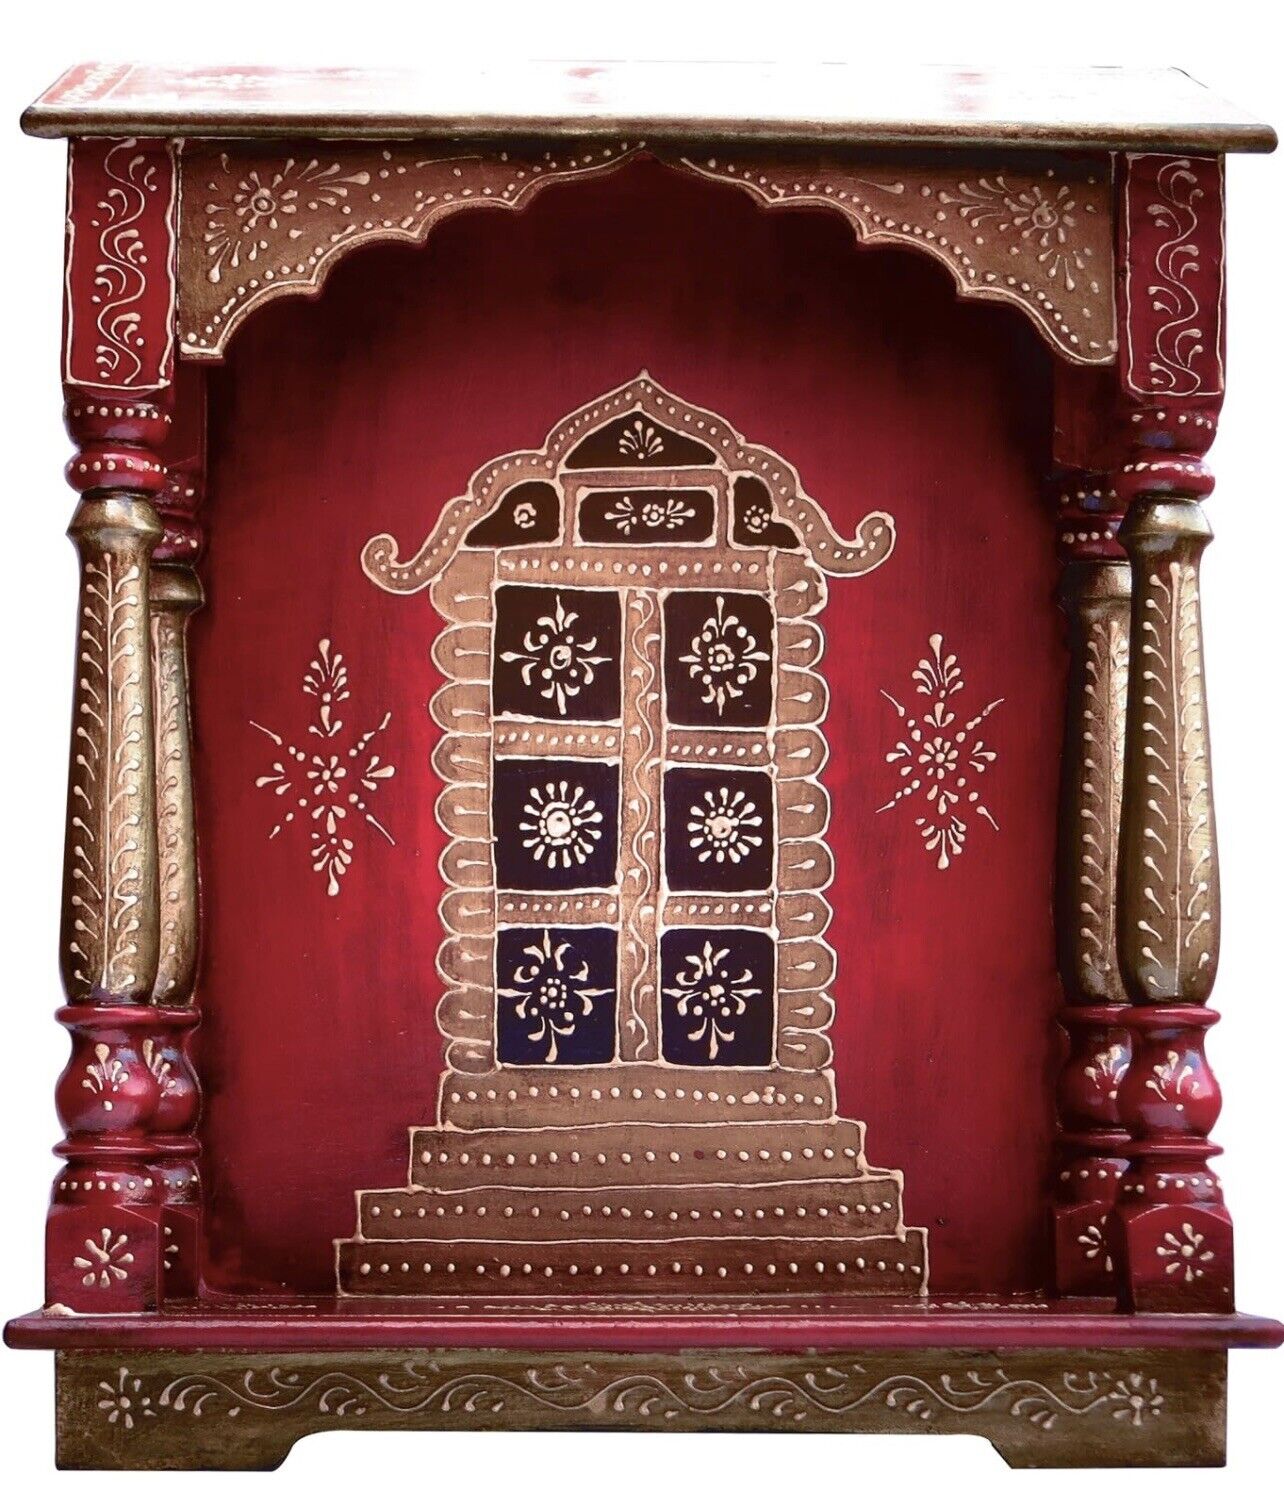 Hindu Religious Temple with Emboss Painting of Temple Inside, a Auscipious, Reli